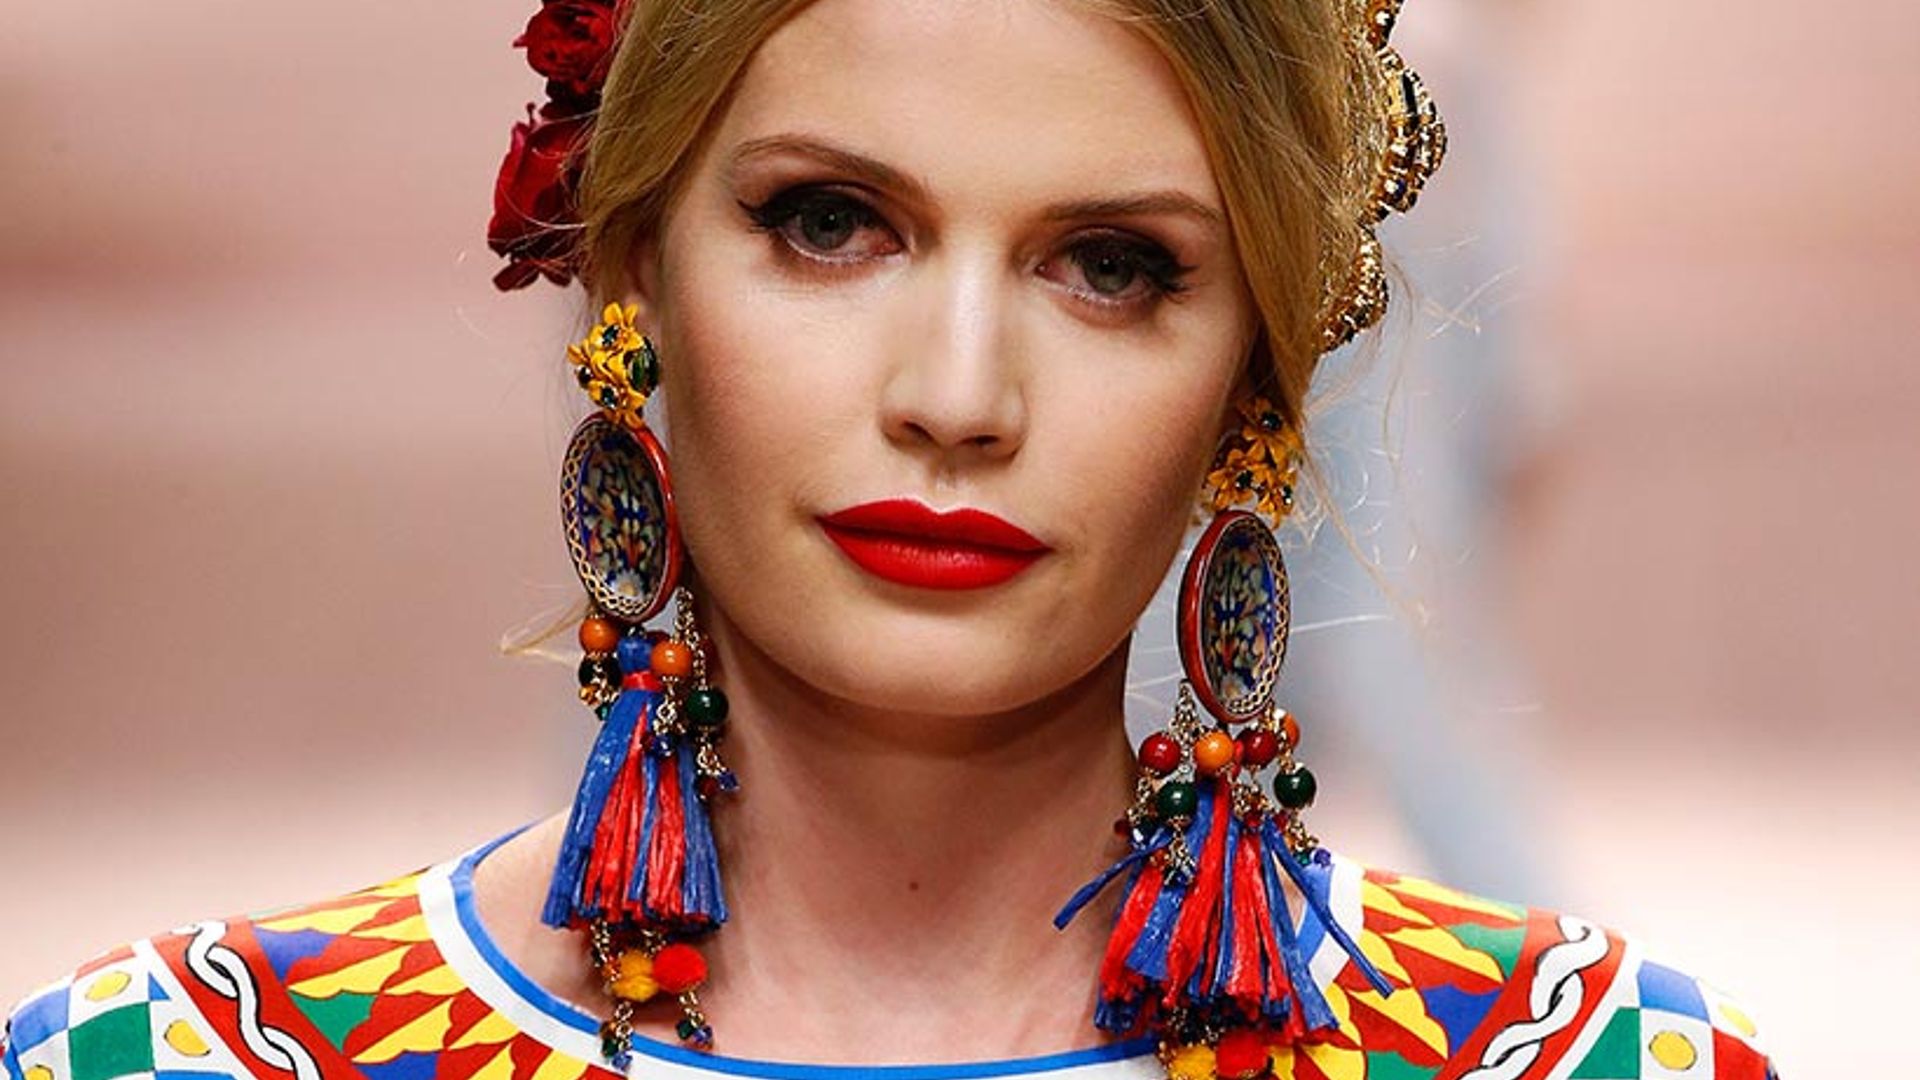 lady kitty spencer dolce and gabbana